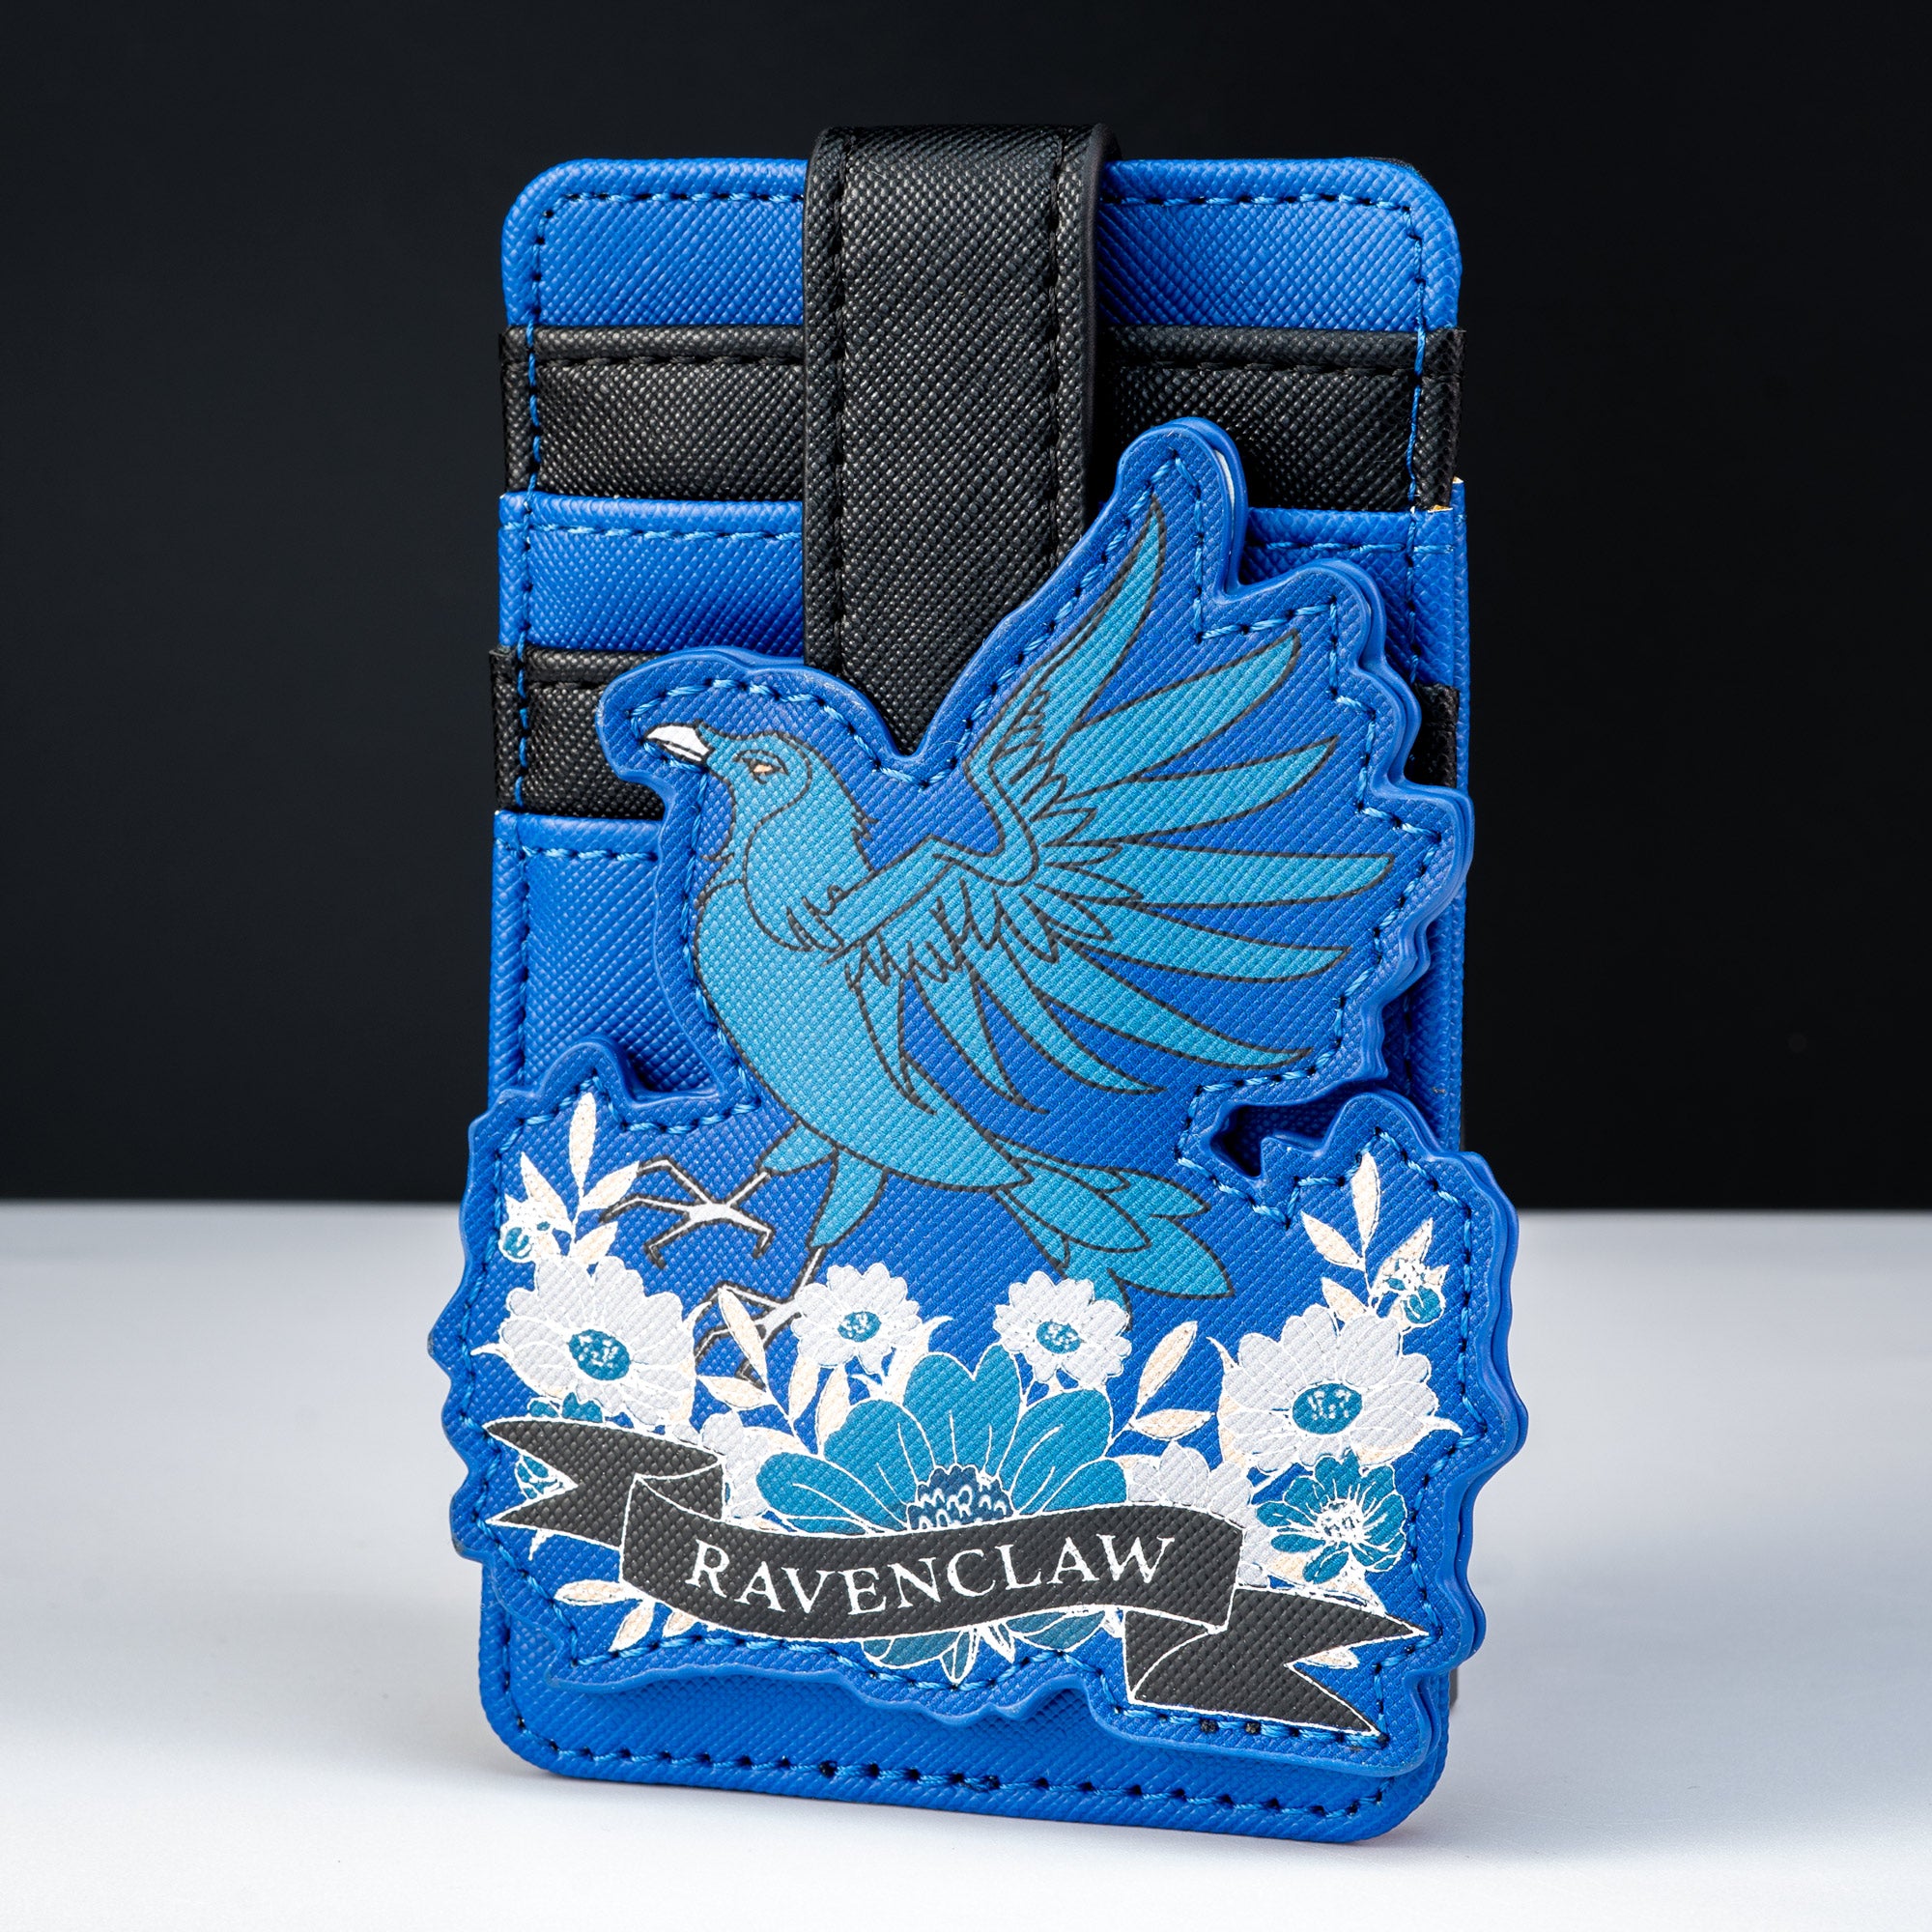 Loungefly x Harry Potter Ravenclaw House Tattoo Card Holder